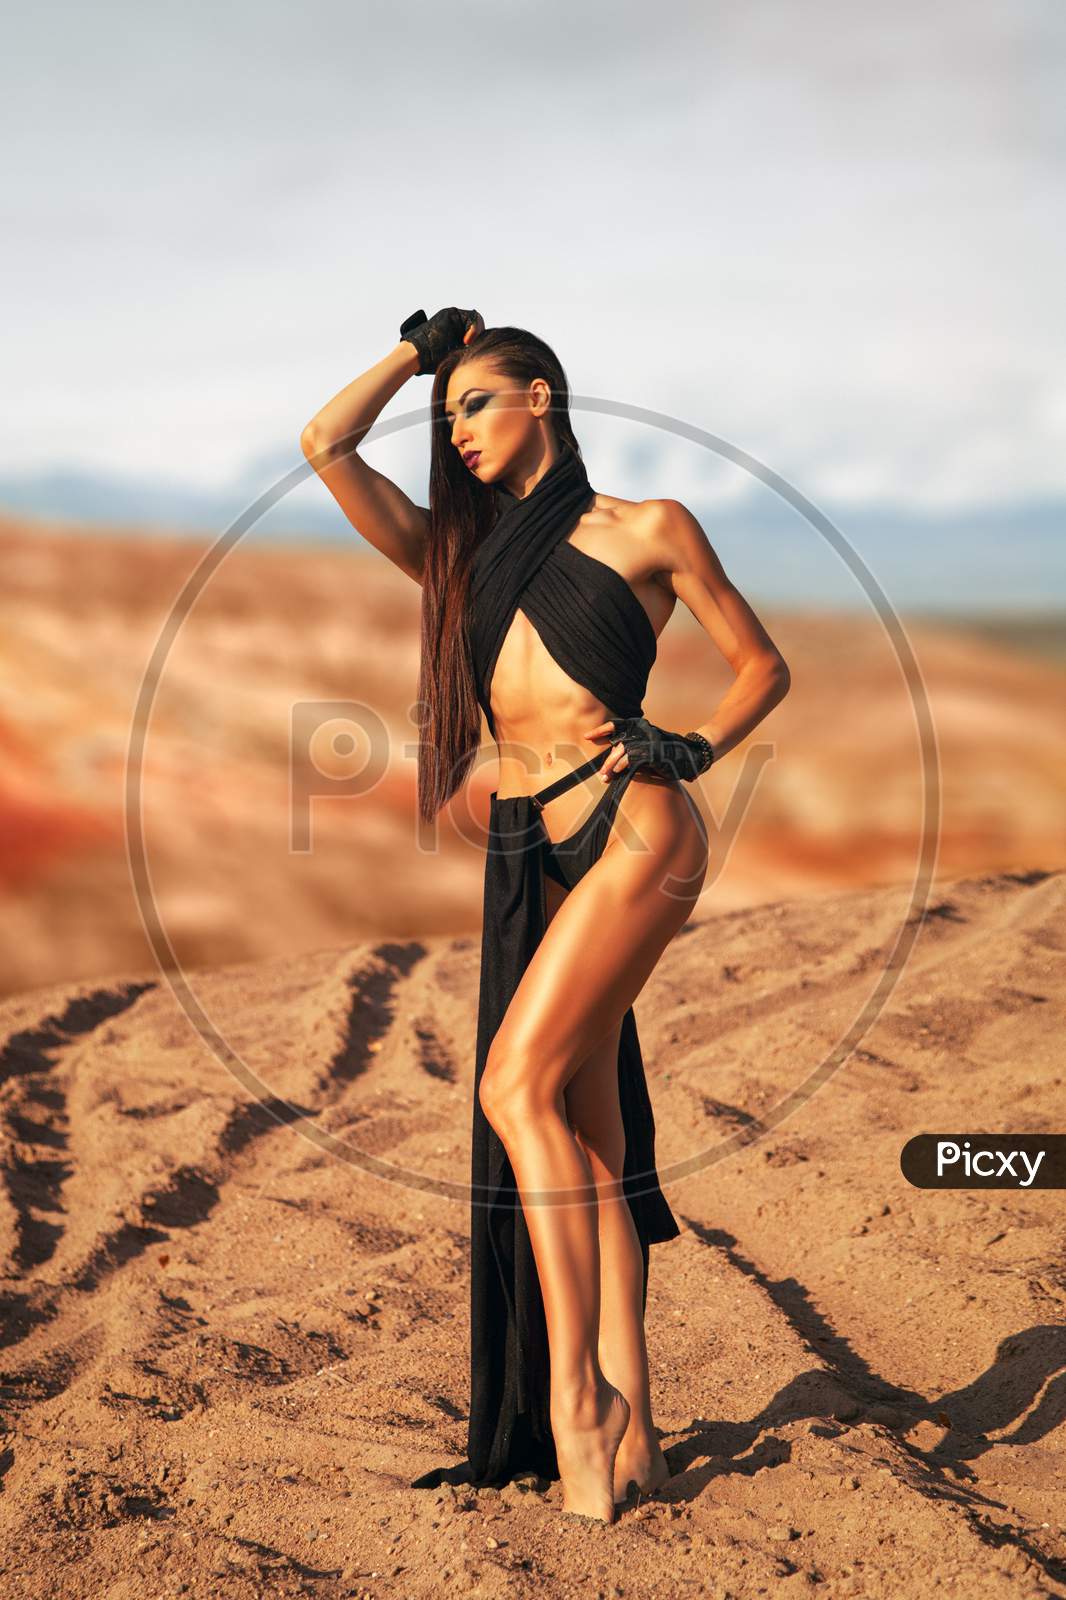 A Young Woman With A Gothic Make-Up In A Black Conceptual Swimsuit In A Gladiatorial Style Is Thoughtfully Posing Against The Backdrop Of Deserts And Mountains.The Concept Of Oriental Tales And Beauty